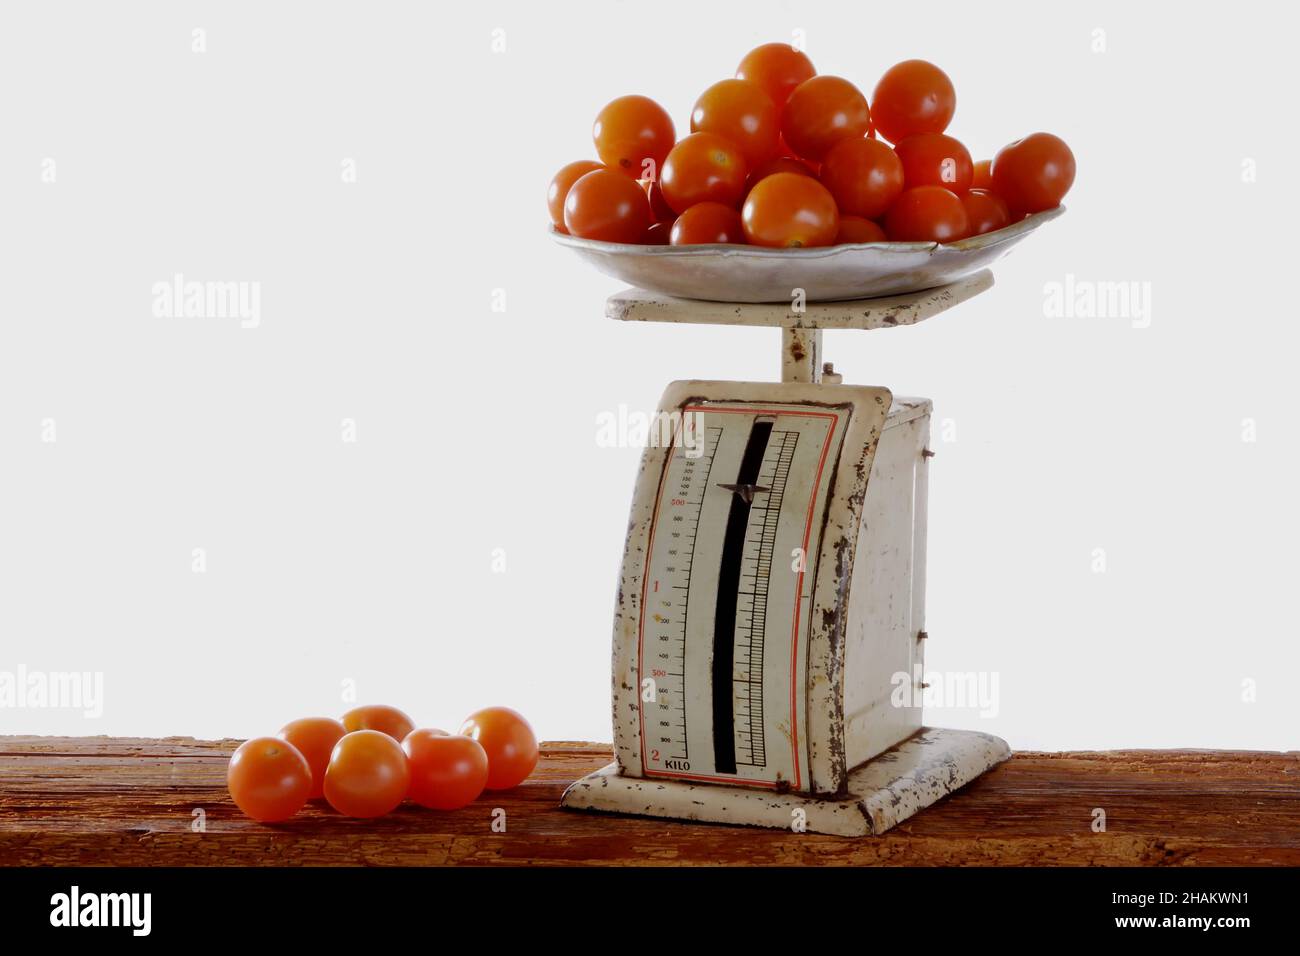 tomatoes on old metal scales on wooden beams, isolated Stock Photo